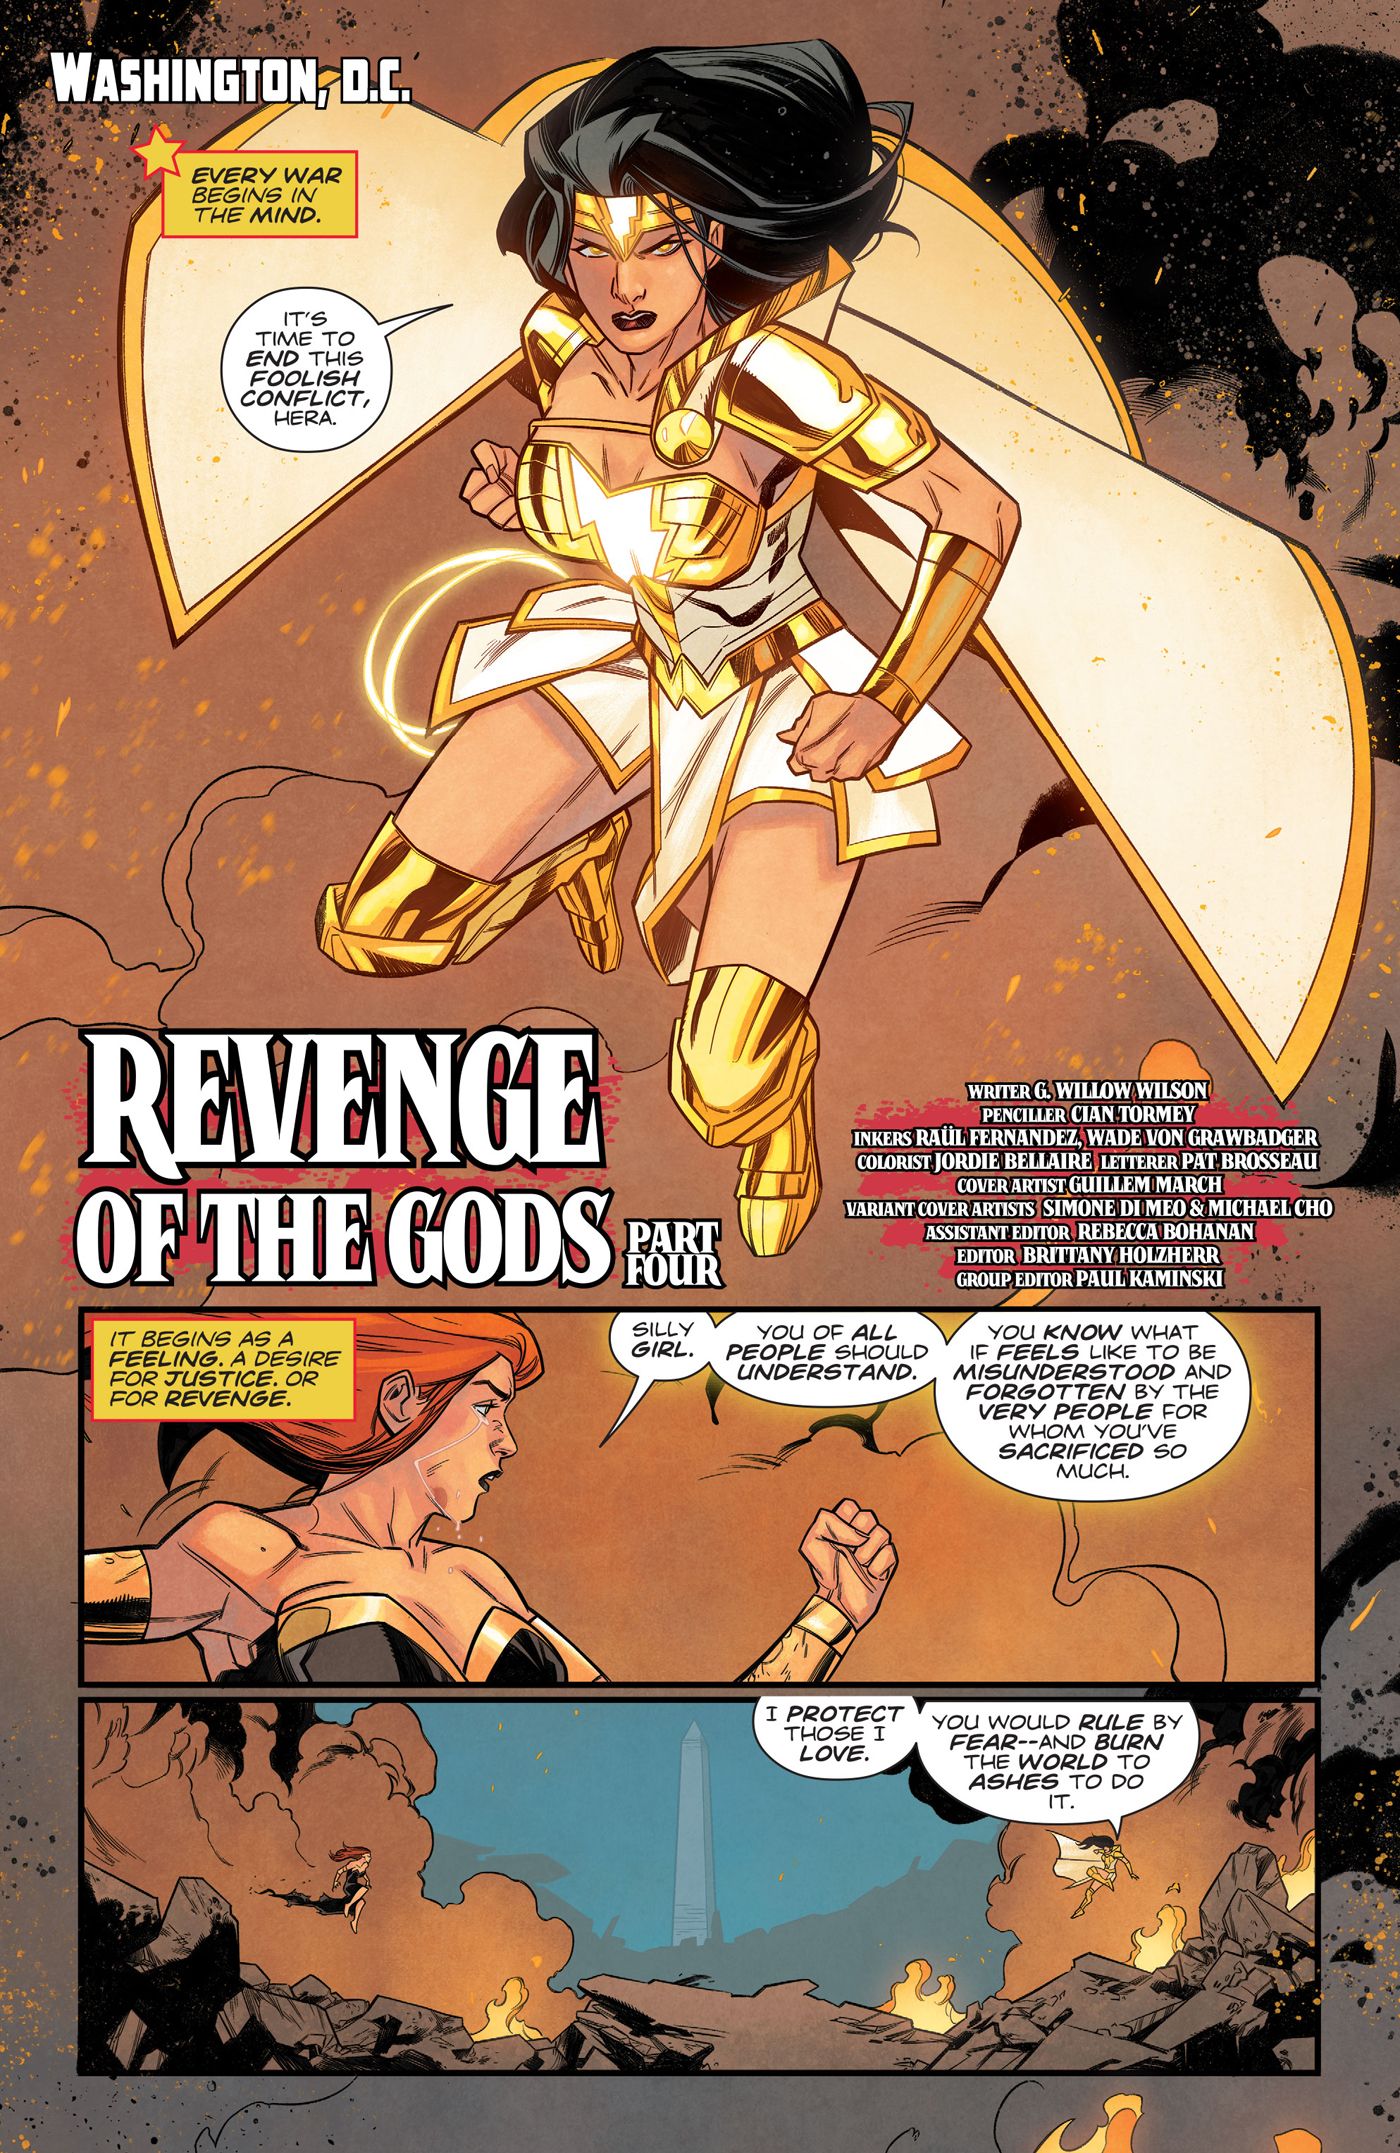 A look at Lazarus Planet: Revenge of the Gods #4 (2023) from DC Comics.